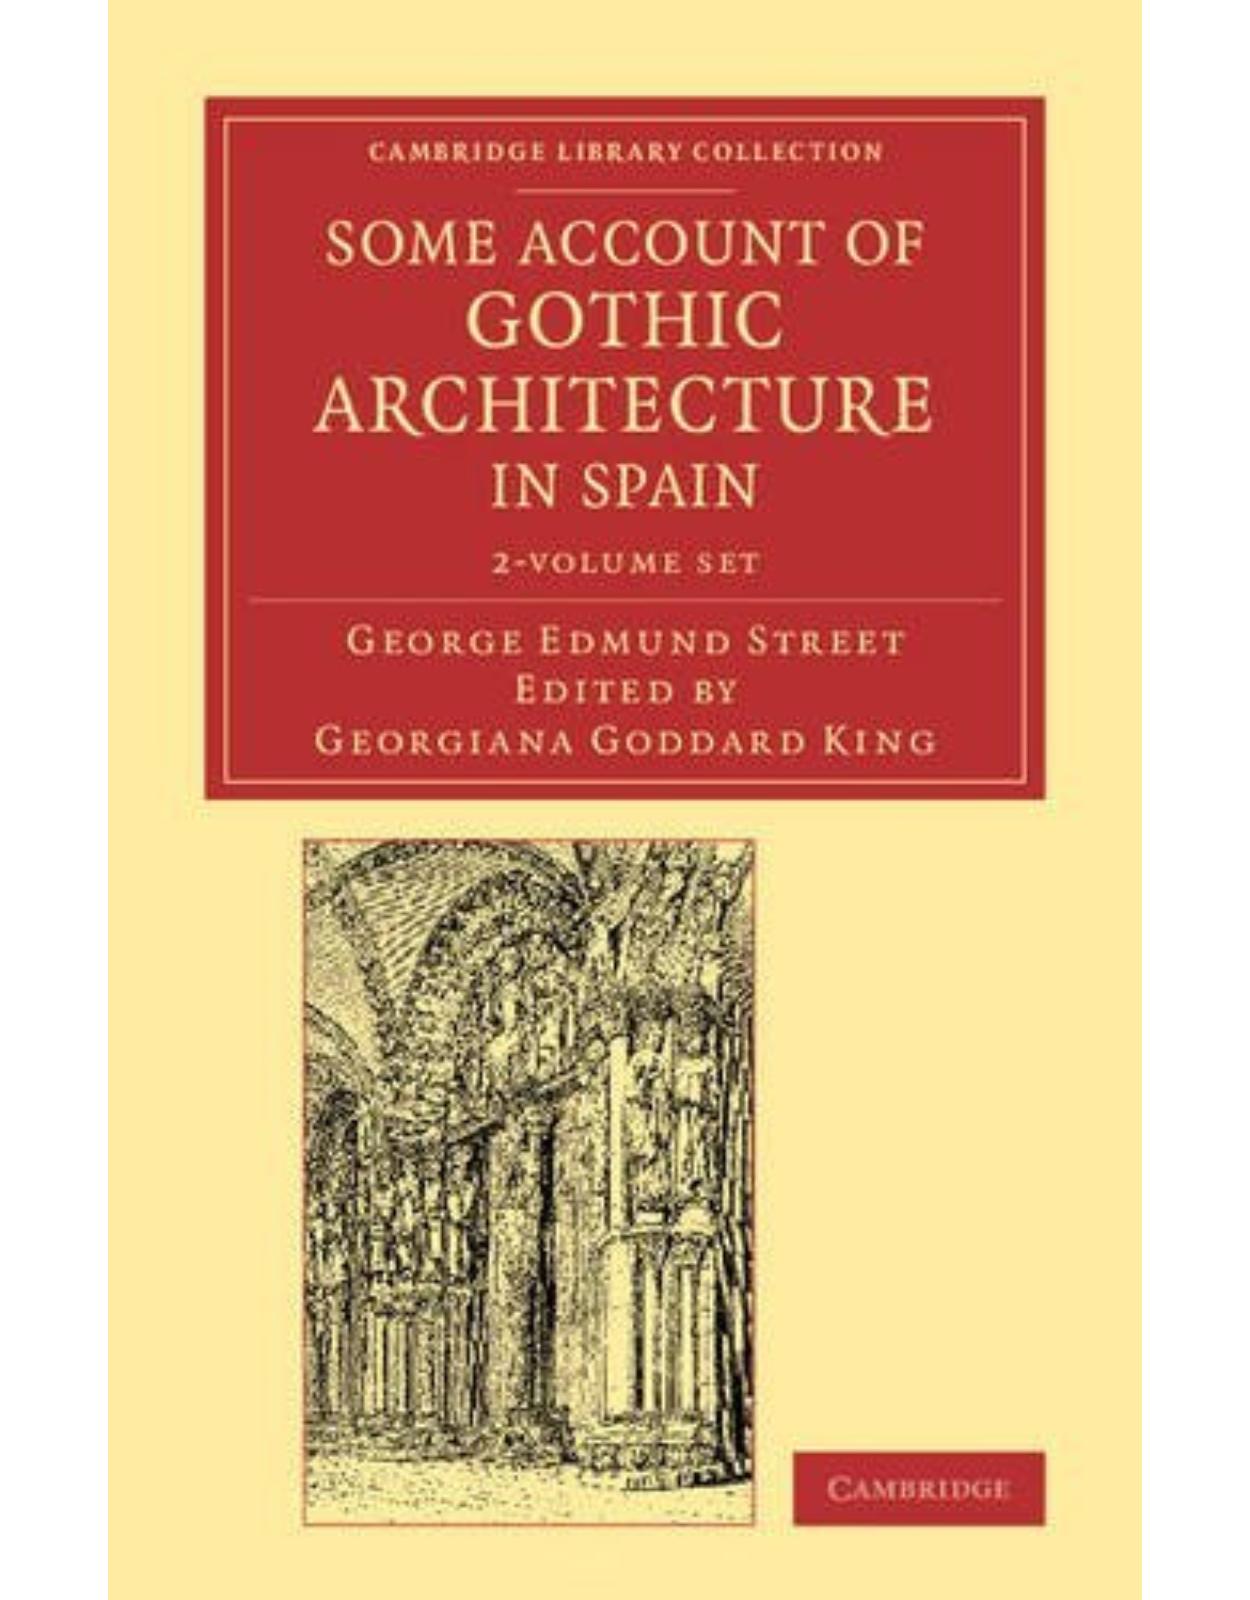 Some Account of Gothic Architecture in Spain 2 Volume Set (Cambridge Library Collection - Art and Architecture)